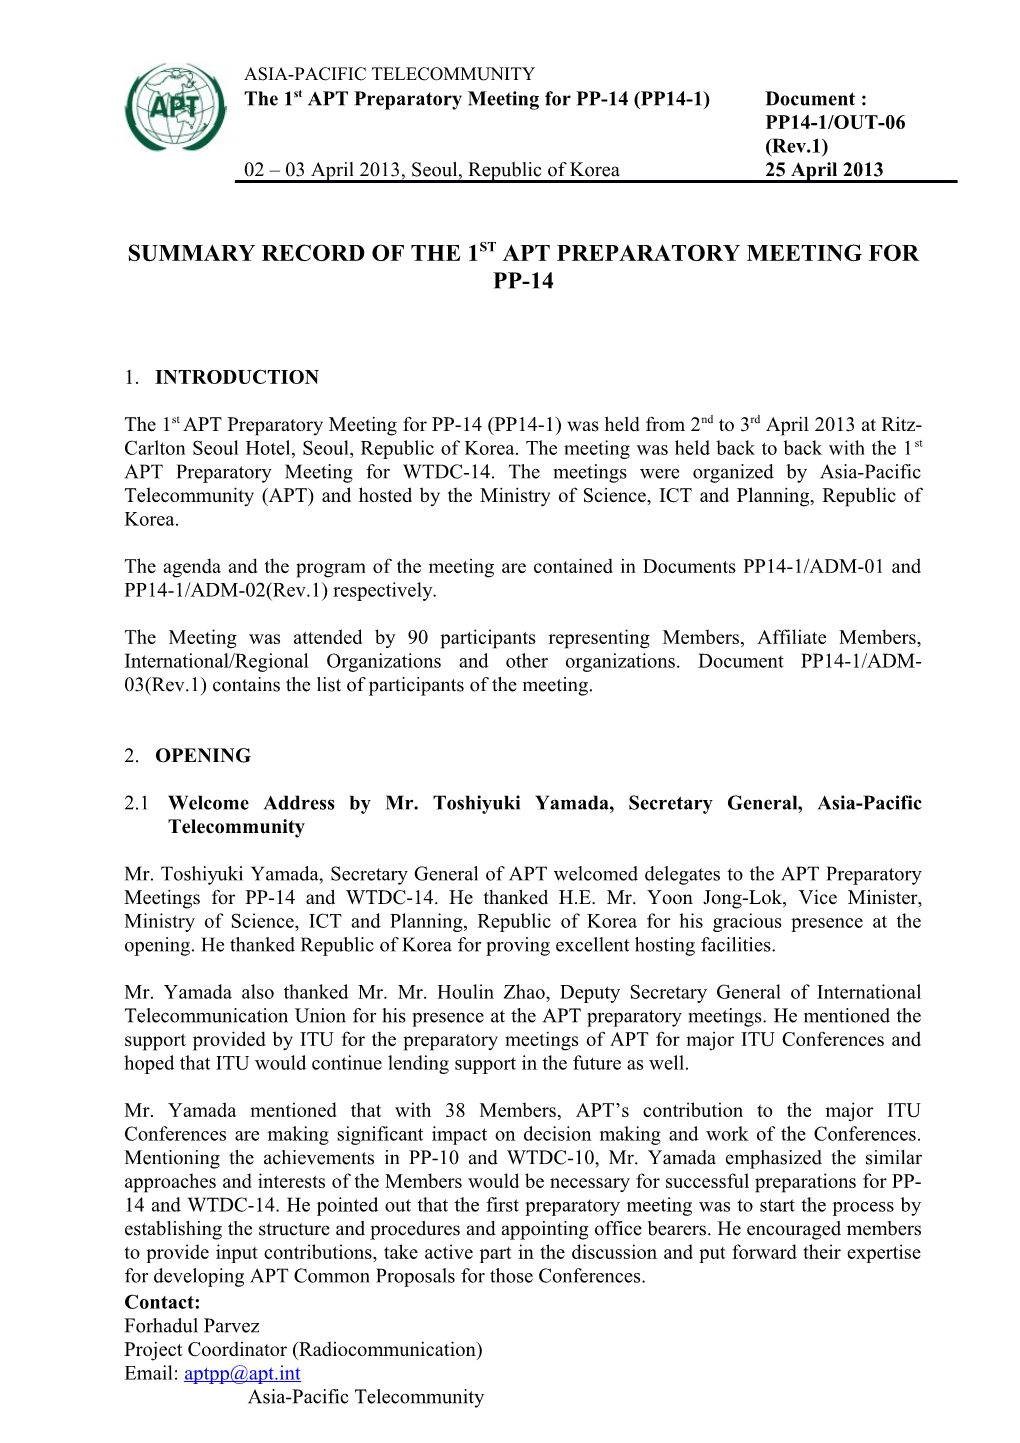 Summary Record of the 1St APT Preparatory Meeting for Pp-14